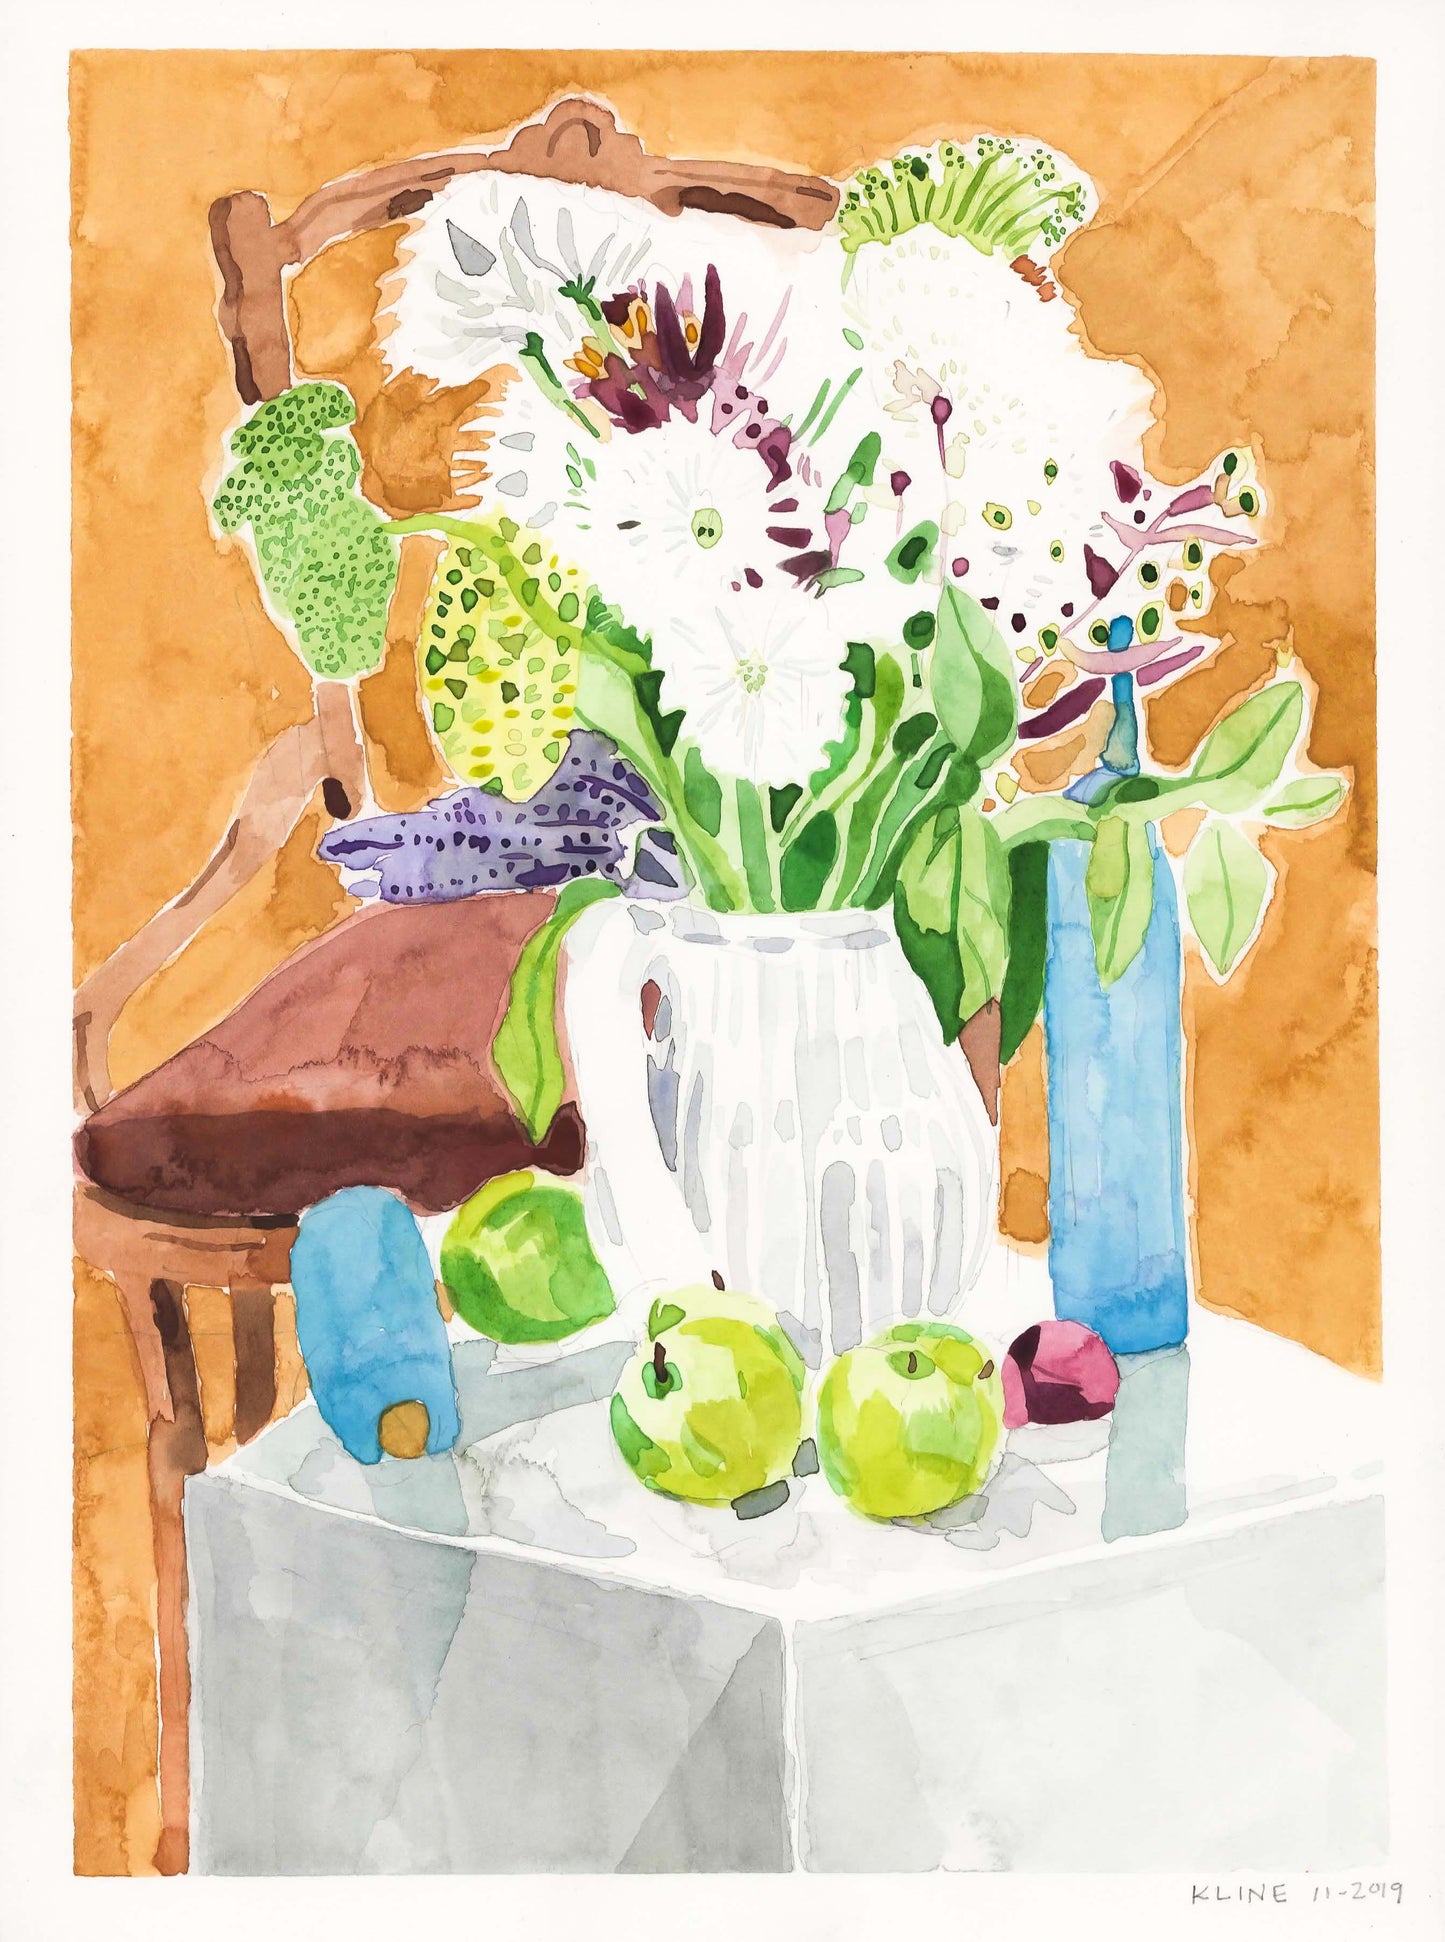 Still-Life with Flowers and Apples. Watercolor. 9" x 12". John Kline Artwork.